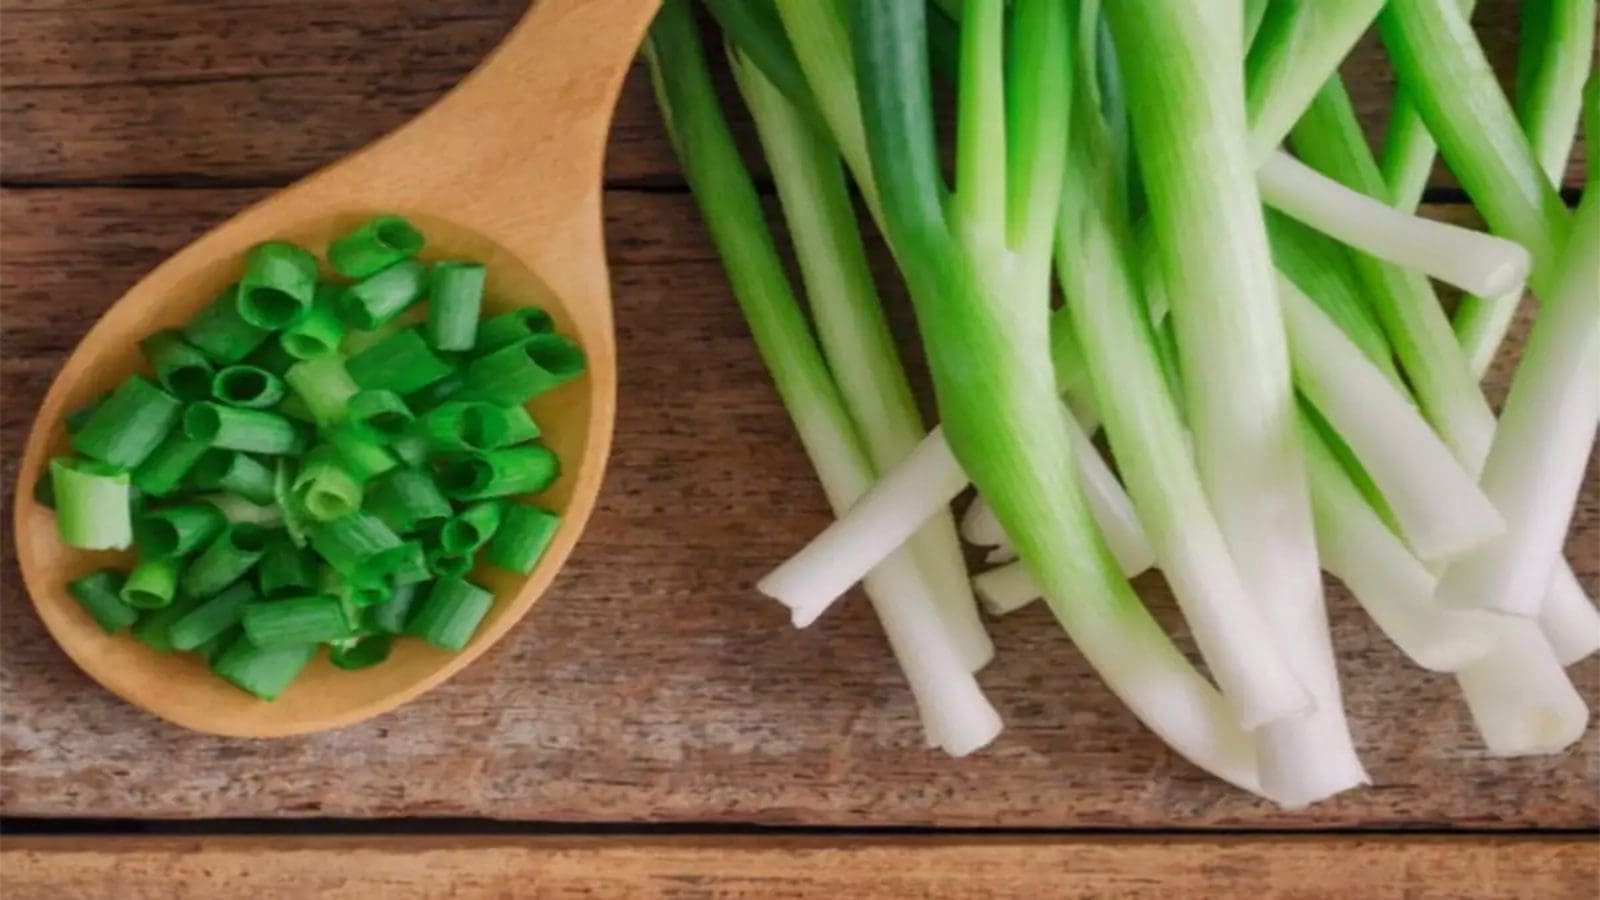 UK Health Security Agency links Shigella outbreak to spring onions imported from Egypt